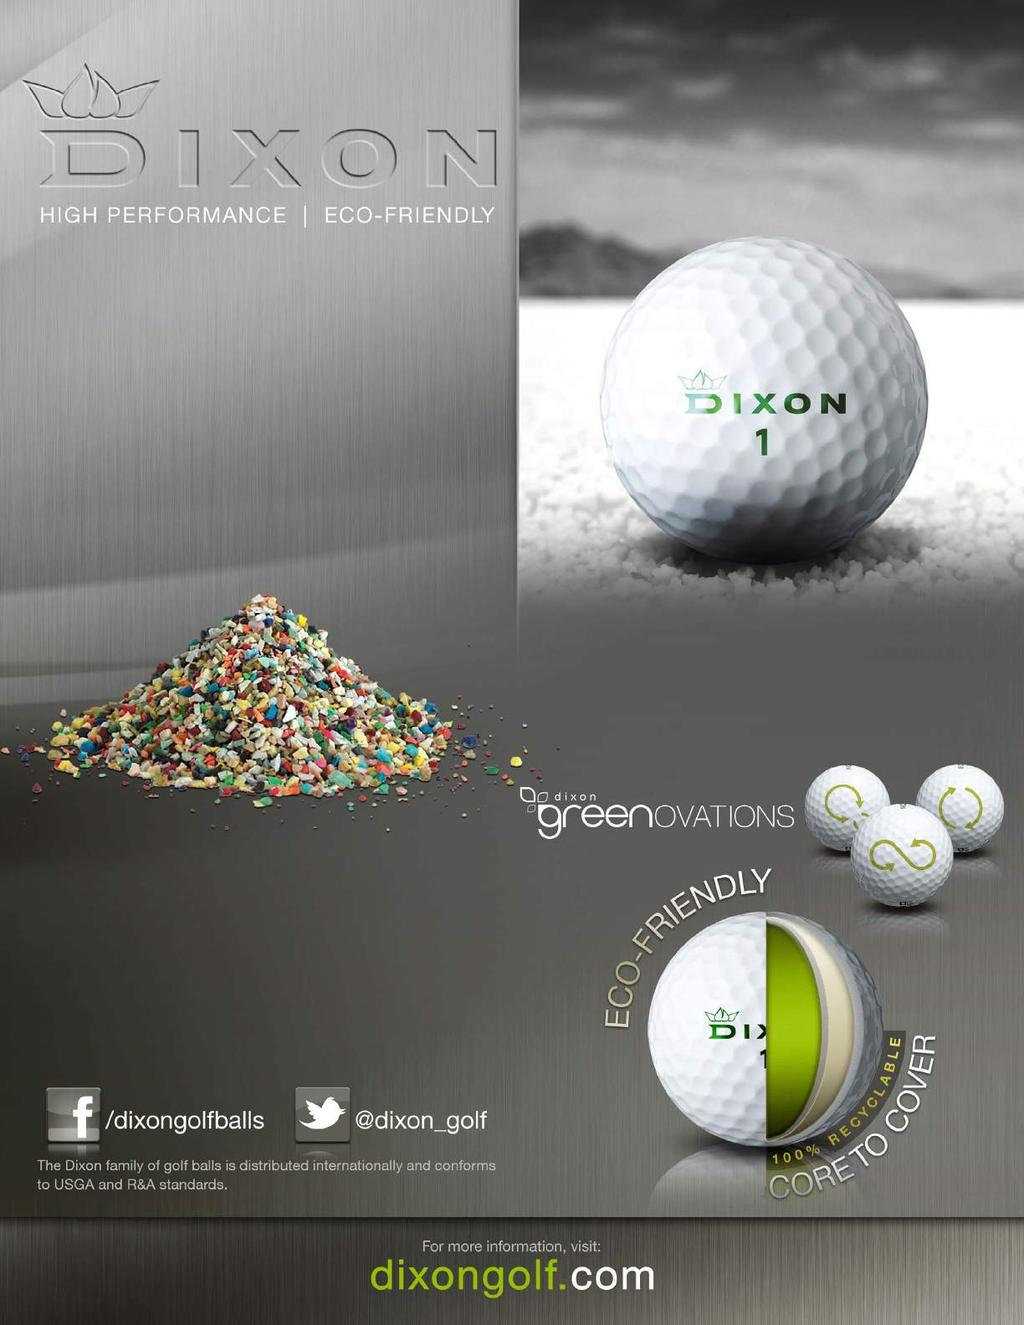 Dixon Golf is an Arizona-based company that created the world s first high performance eco-friendly family of golf balls.